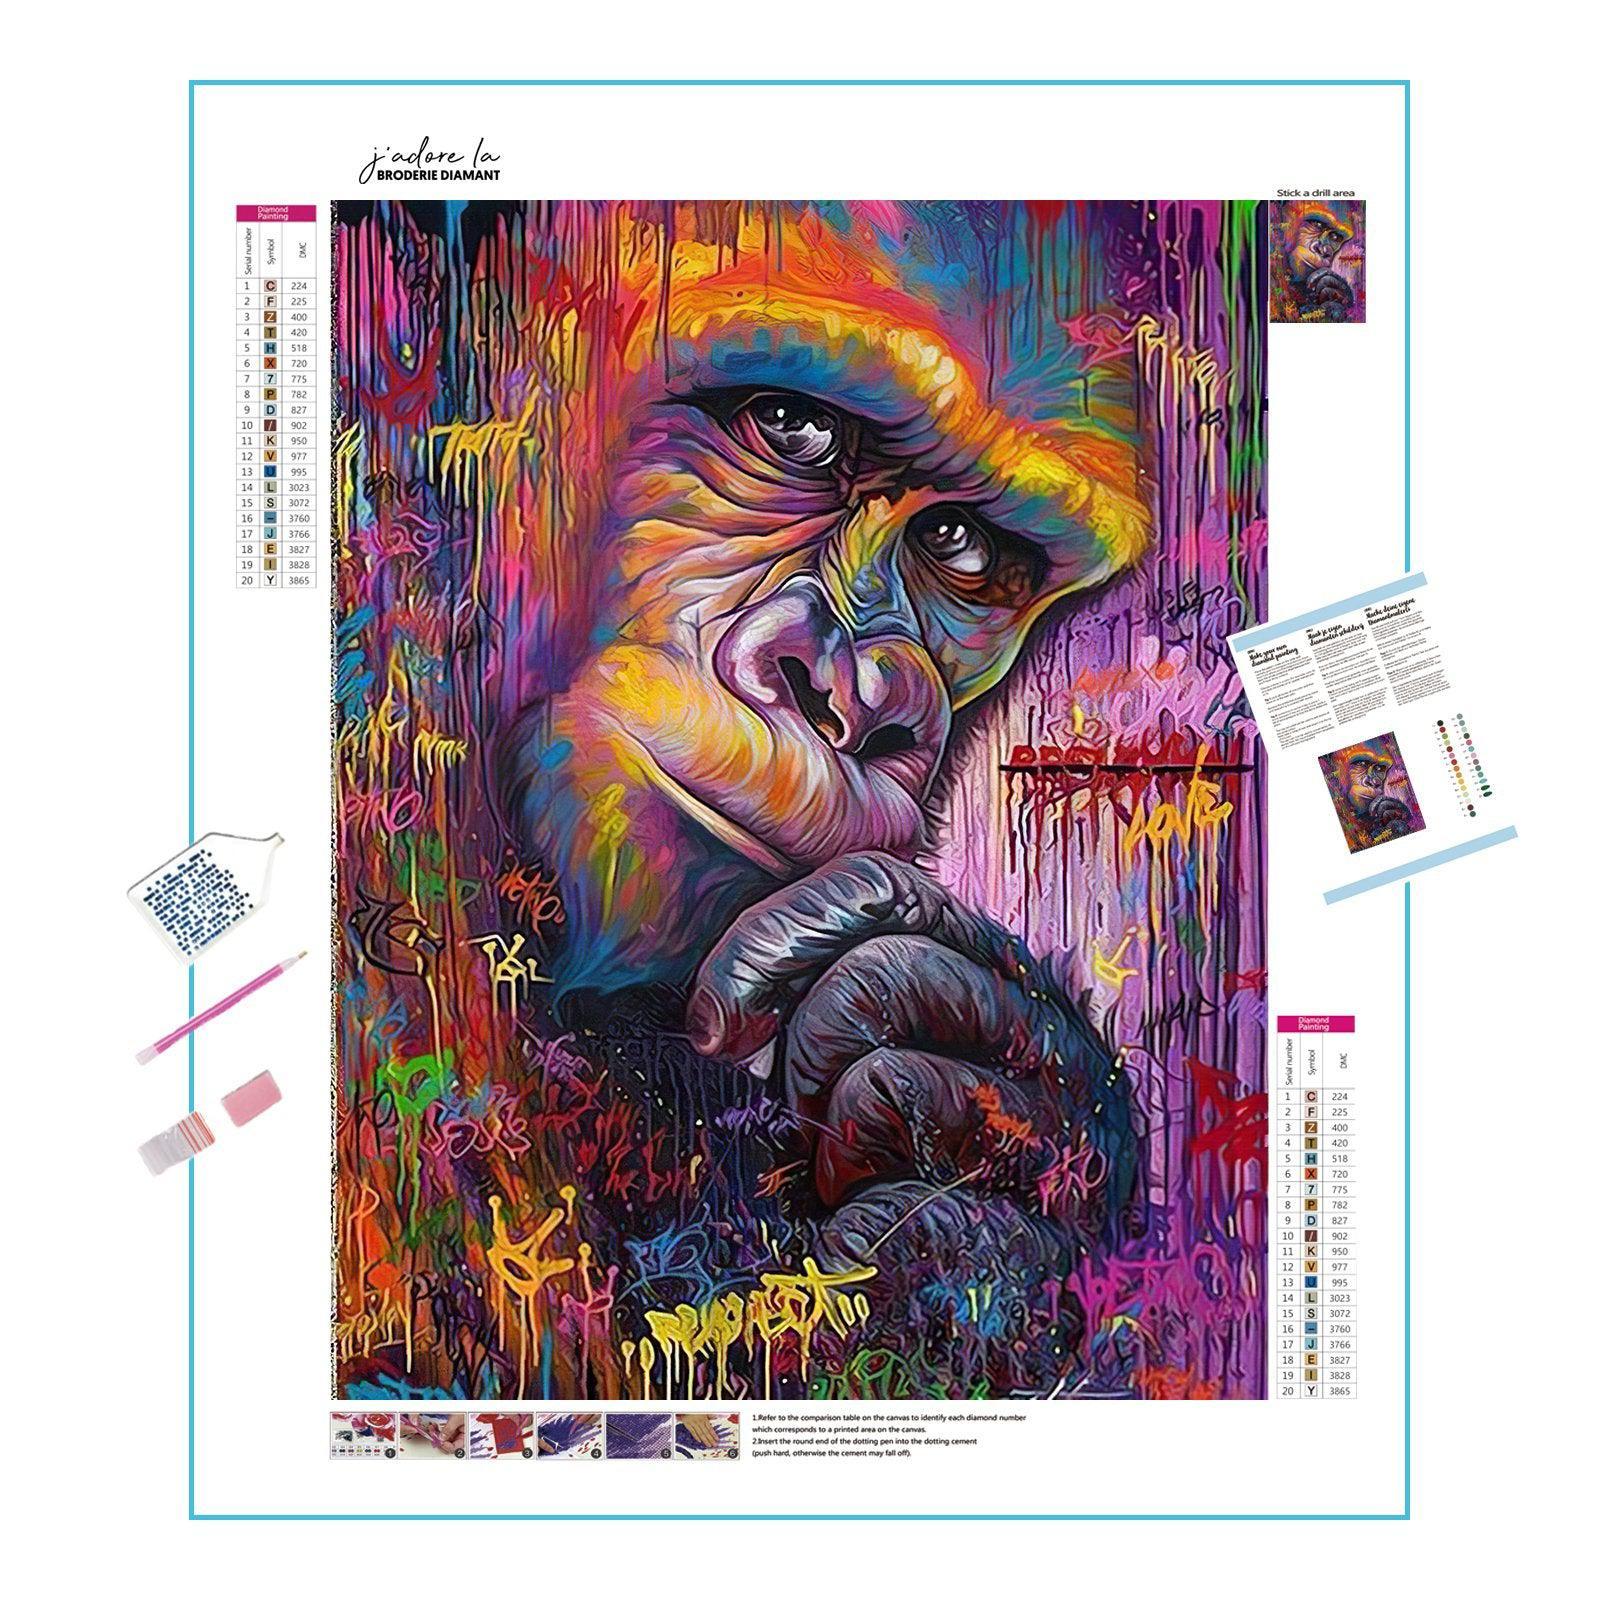 Meet a colorful monkey, a playful spirit adorned in nature's vibrant colors. Colorful Monkey - Diamondartlove